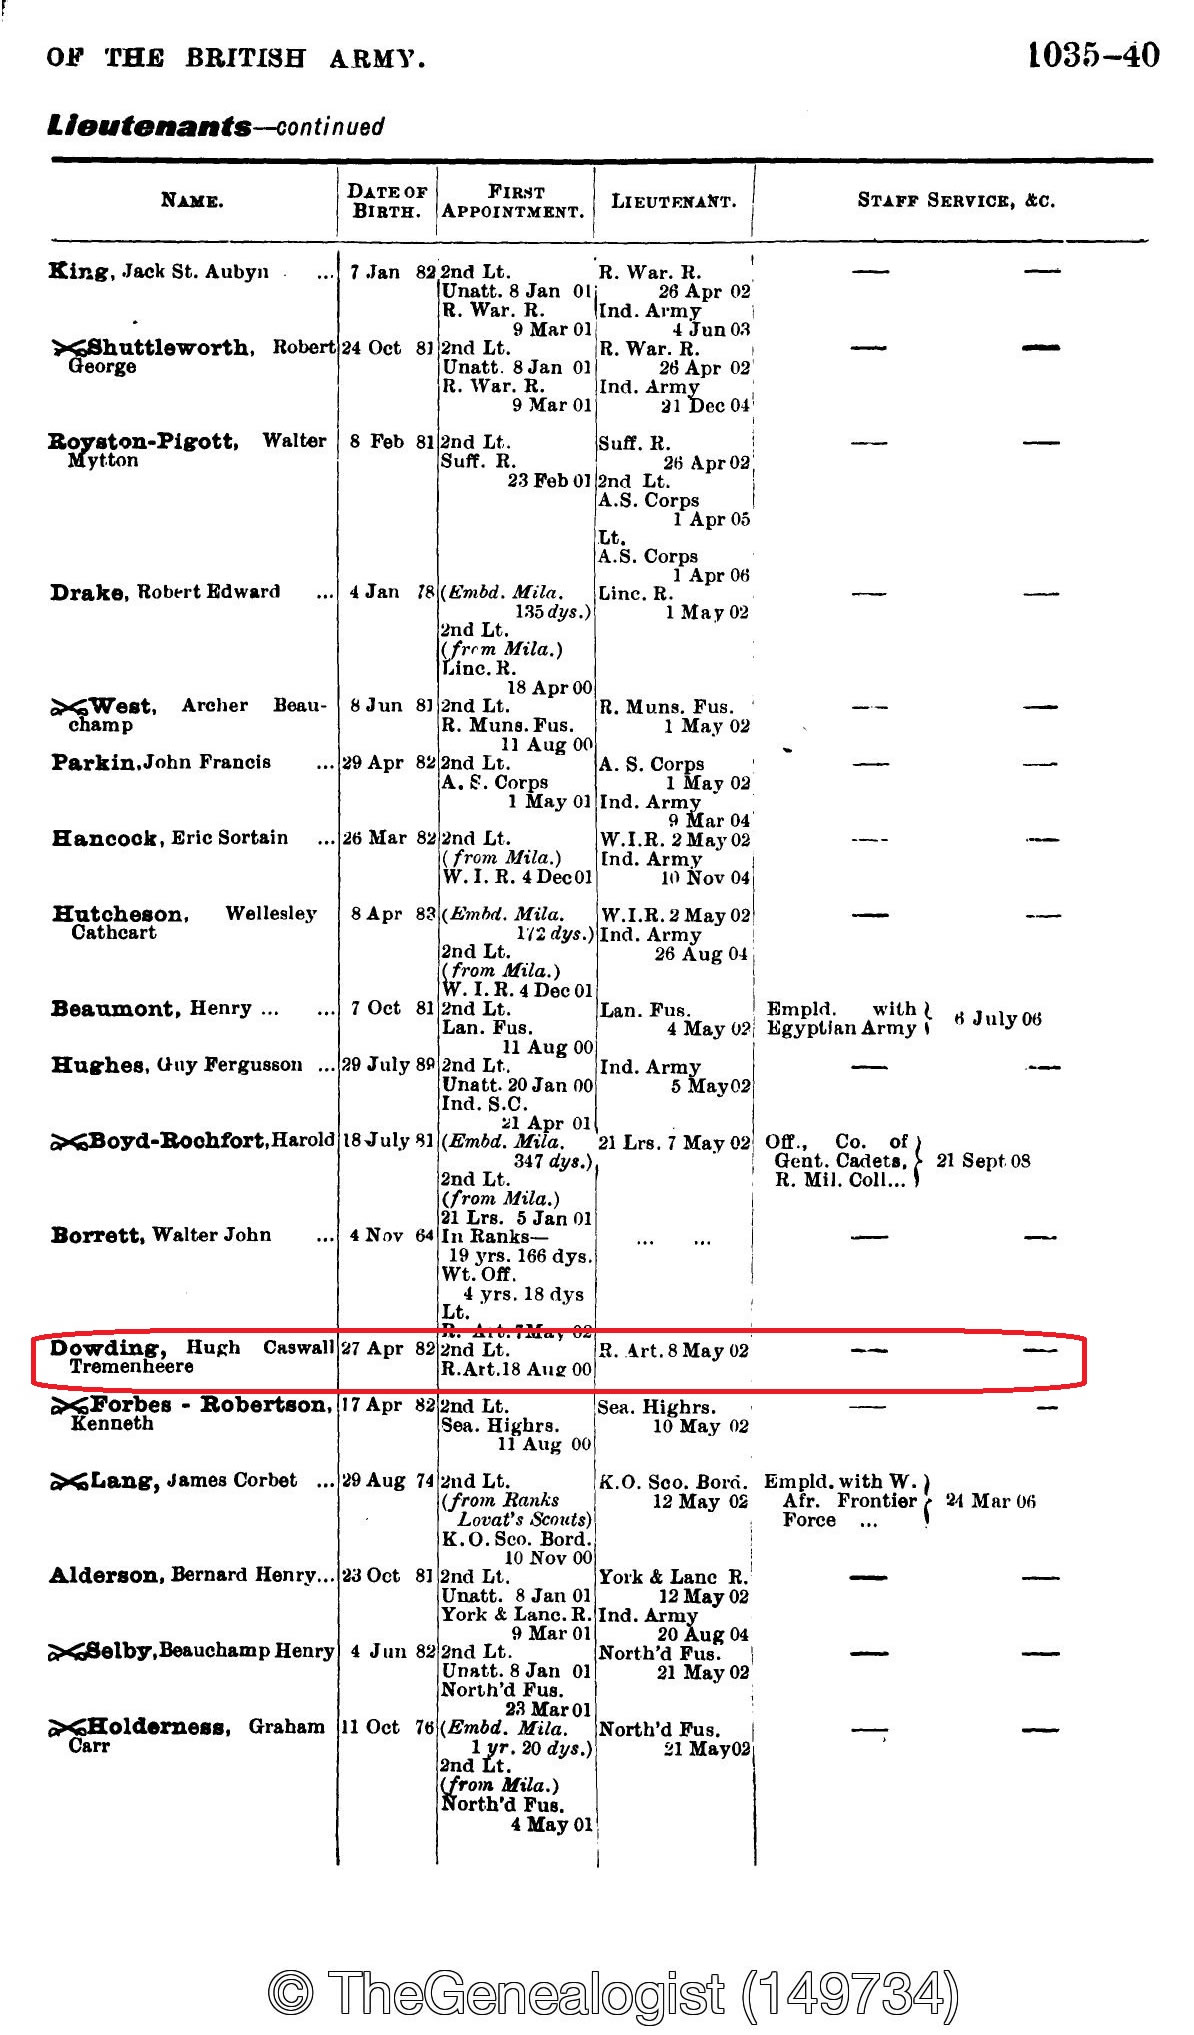 The Army List 1909 on TheGenealogist